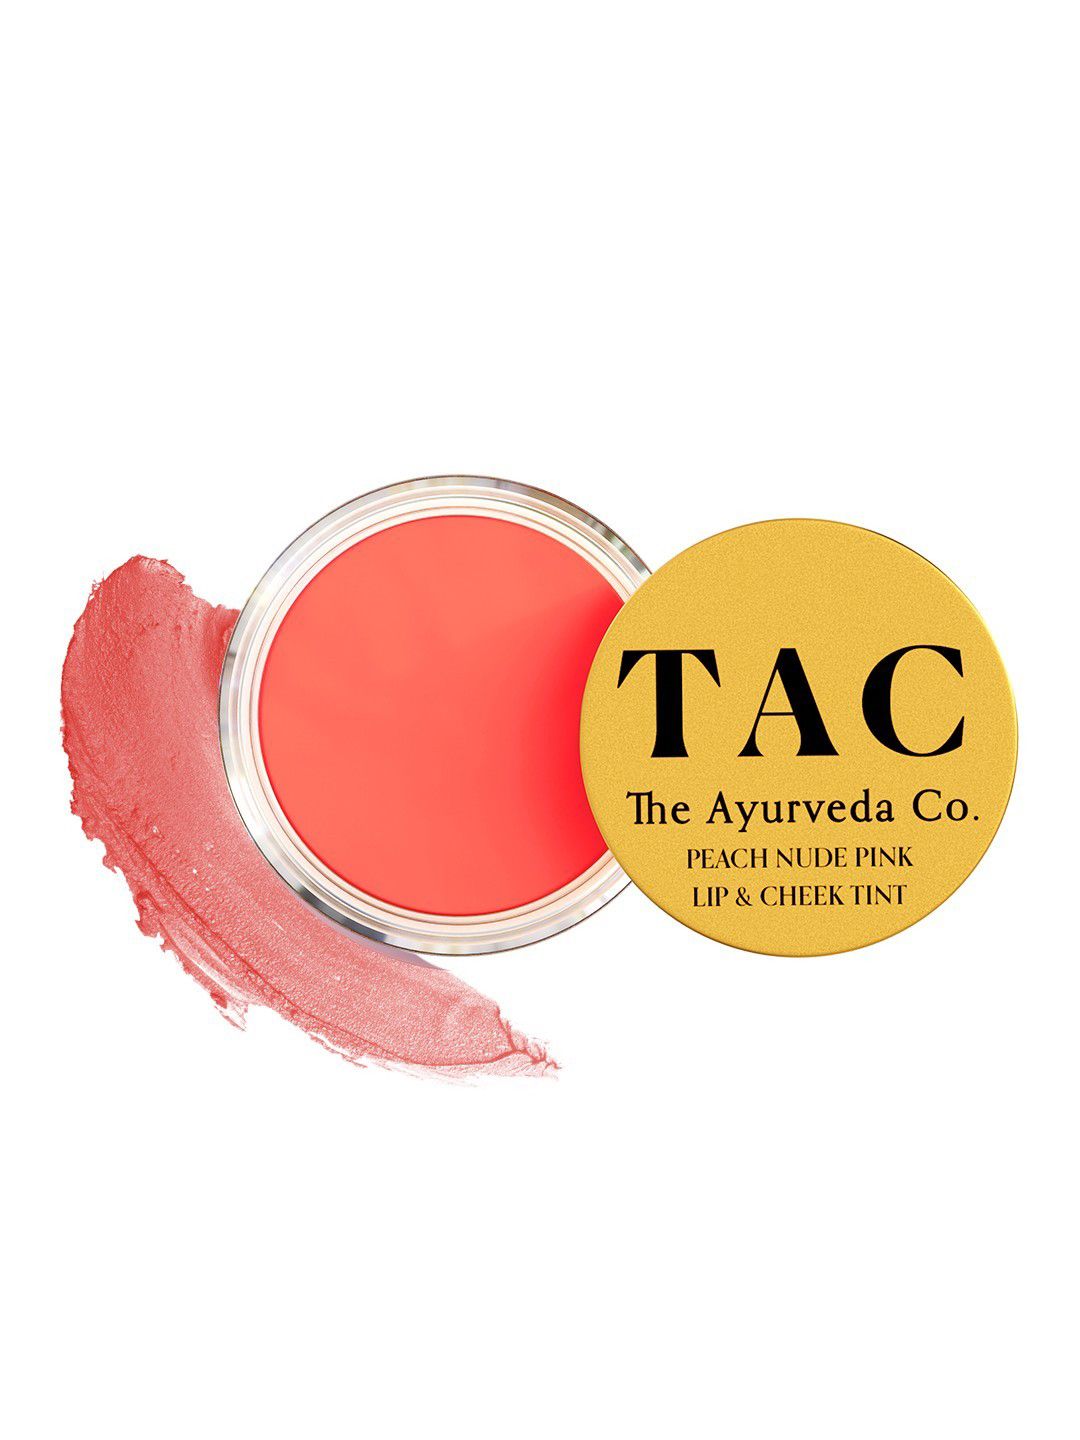 TAC - The Ayurveda Co. Peach Nude Pink Lip And Cheek Tint with Shea Butter & Coconut Oil Price in India